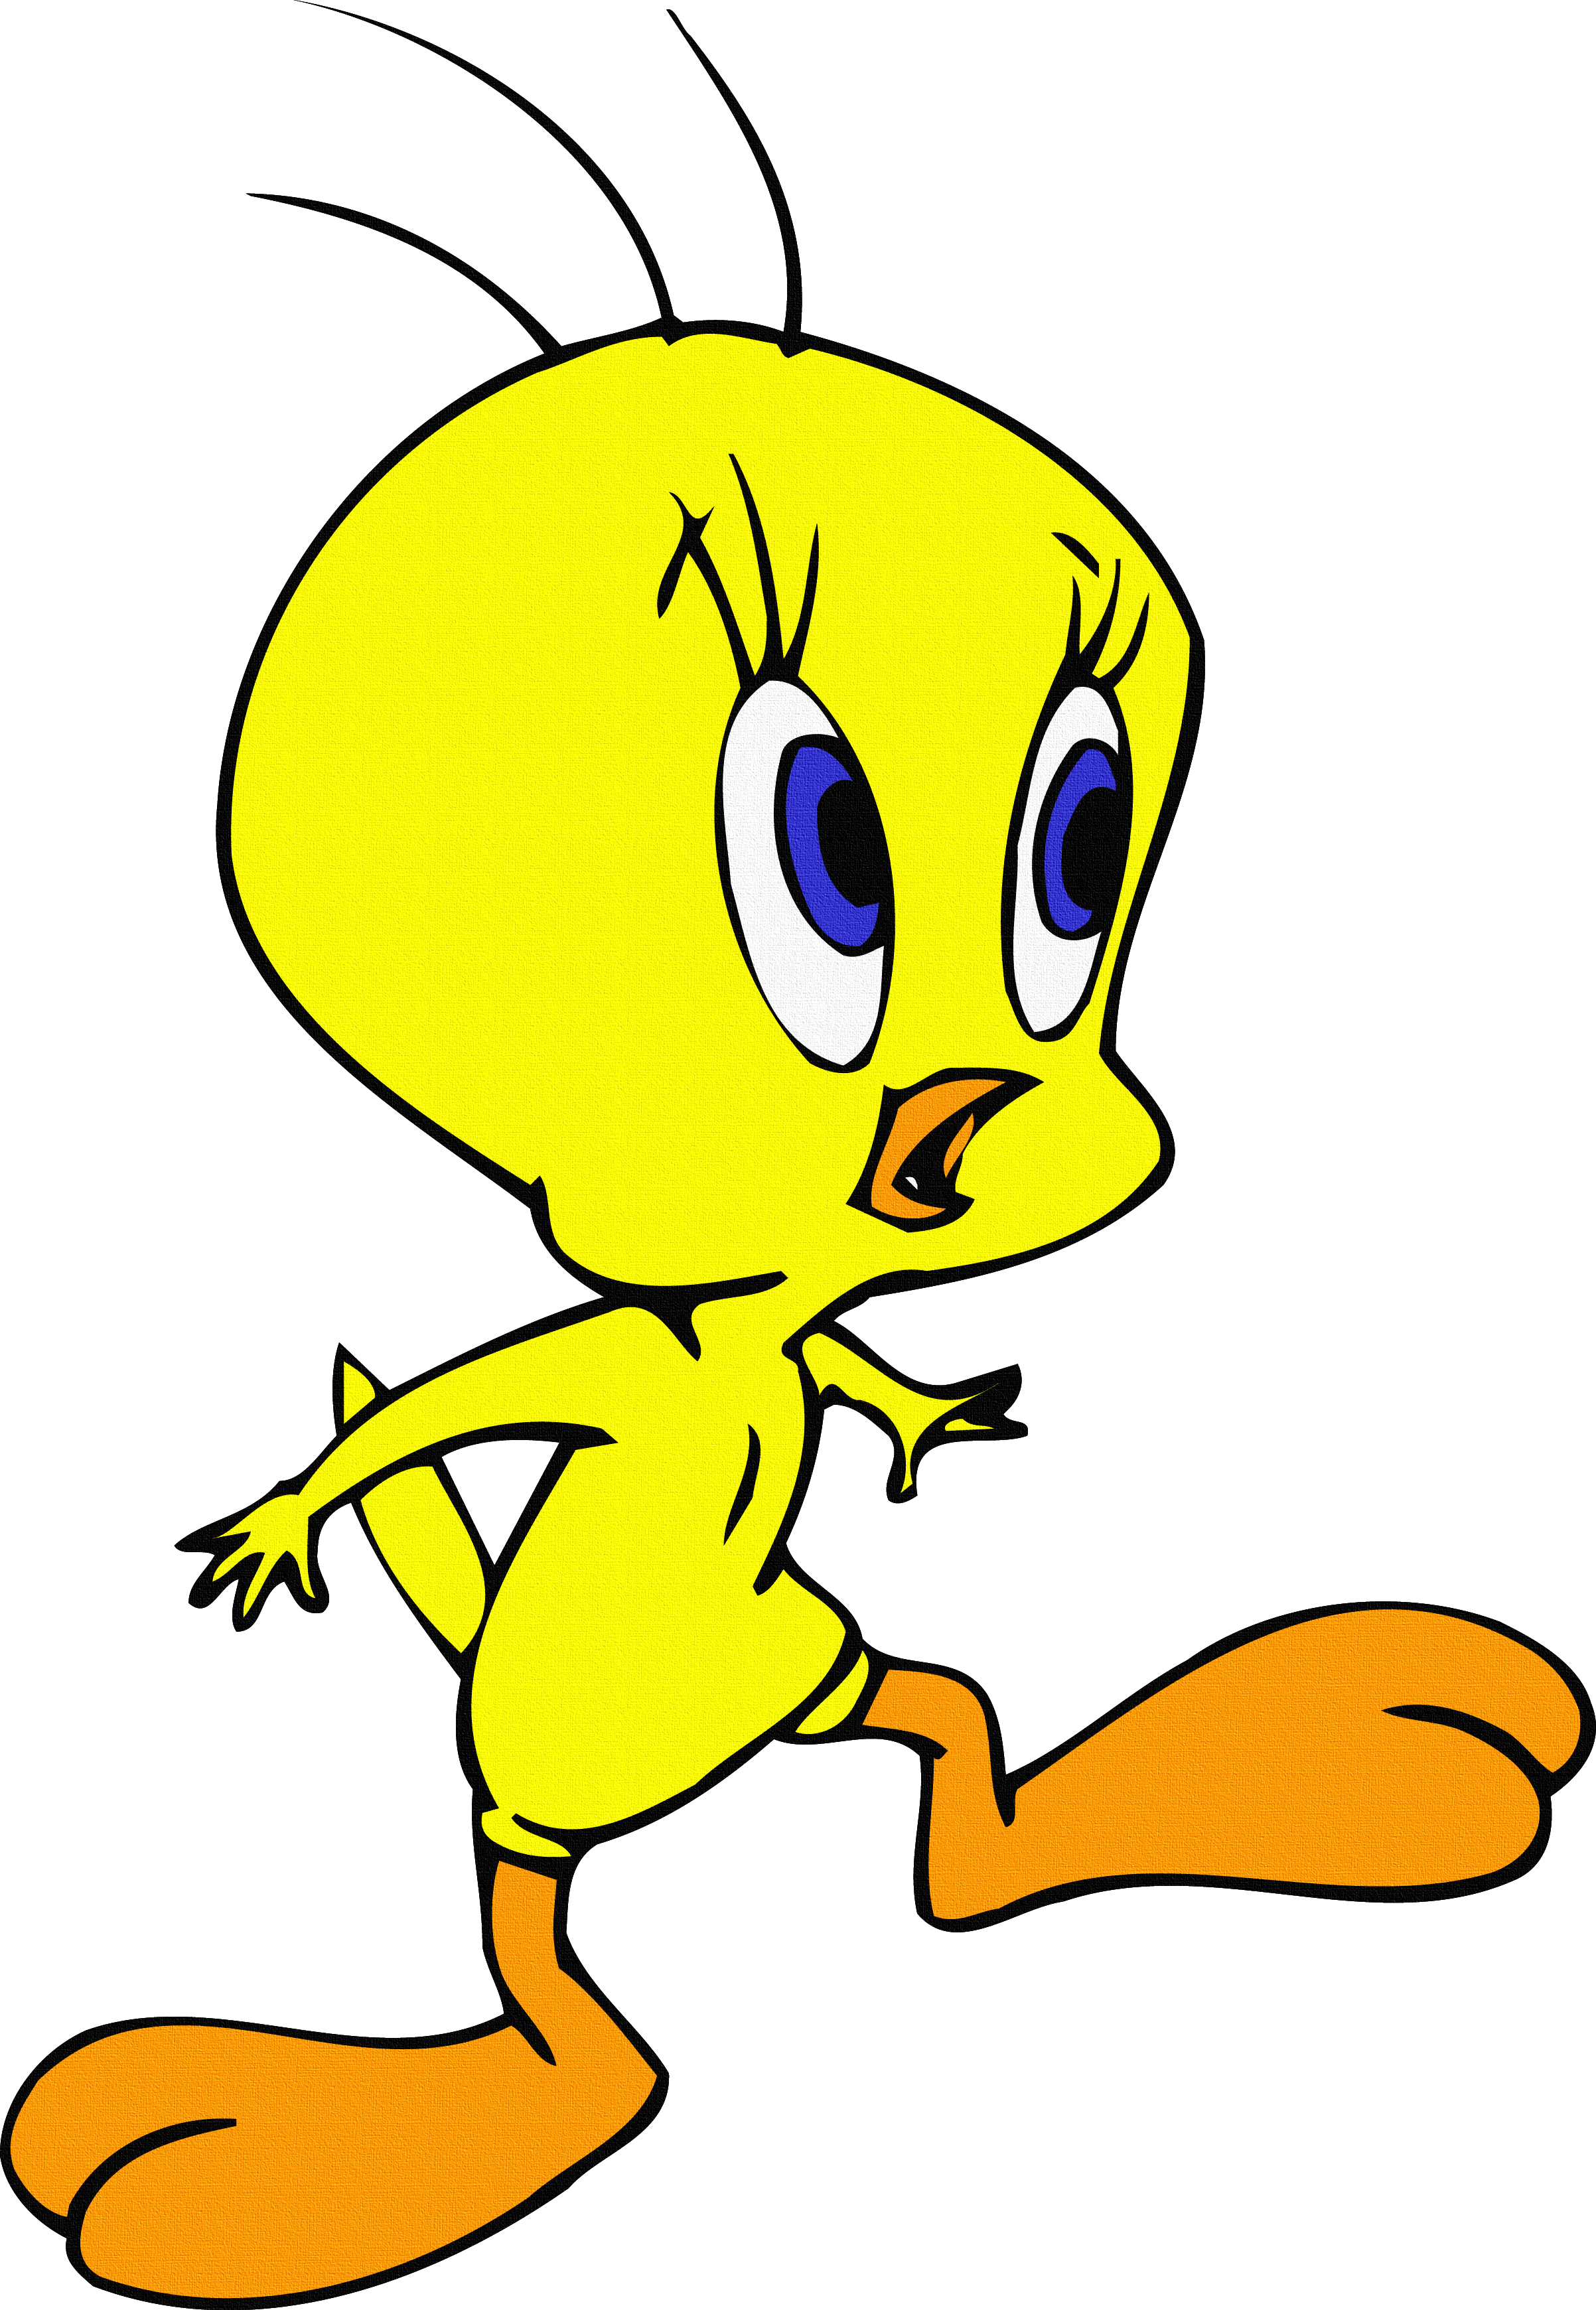 share clipart about Tweety KuÅŸ - Good Cartoon Characters, Find more high qu...